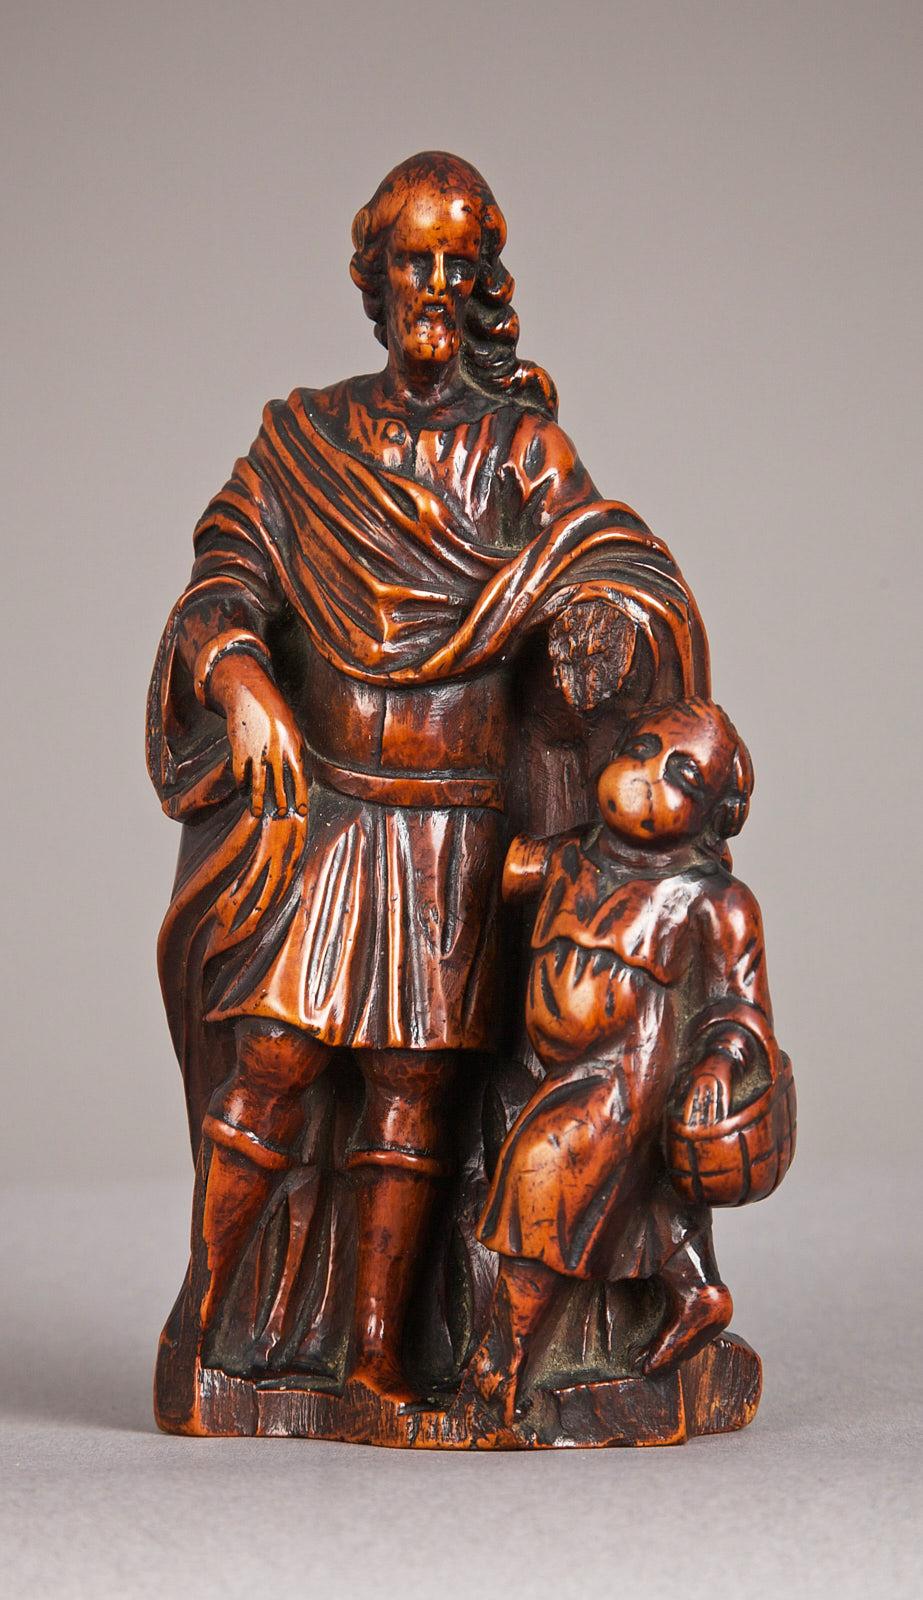 Late 16th century boxwood carving of St Joseph, Flemish - Antwerp, circa 1580 - 1600.

The highly patinated figure of St Joseph with the Christ child carrying a basket.

Provenance: From the collection of Sam Wolsey, dealer in early English